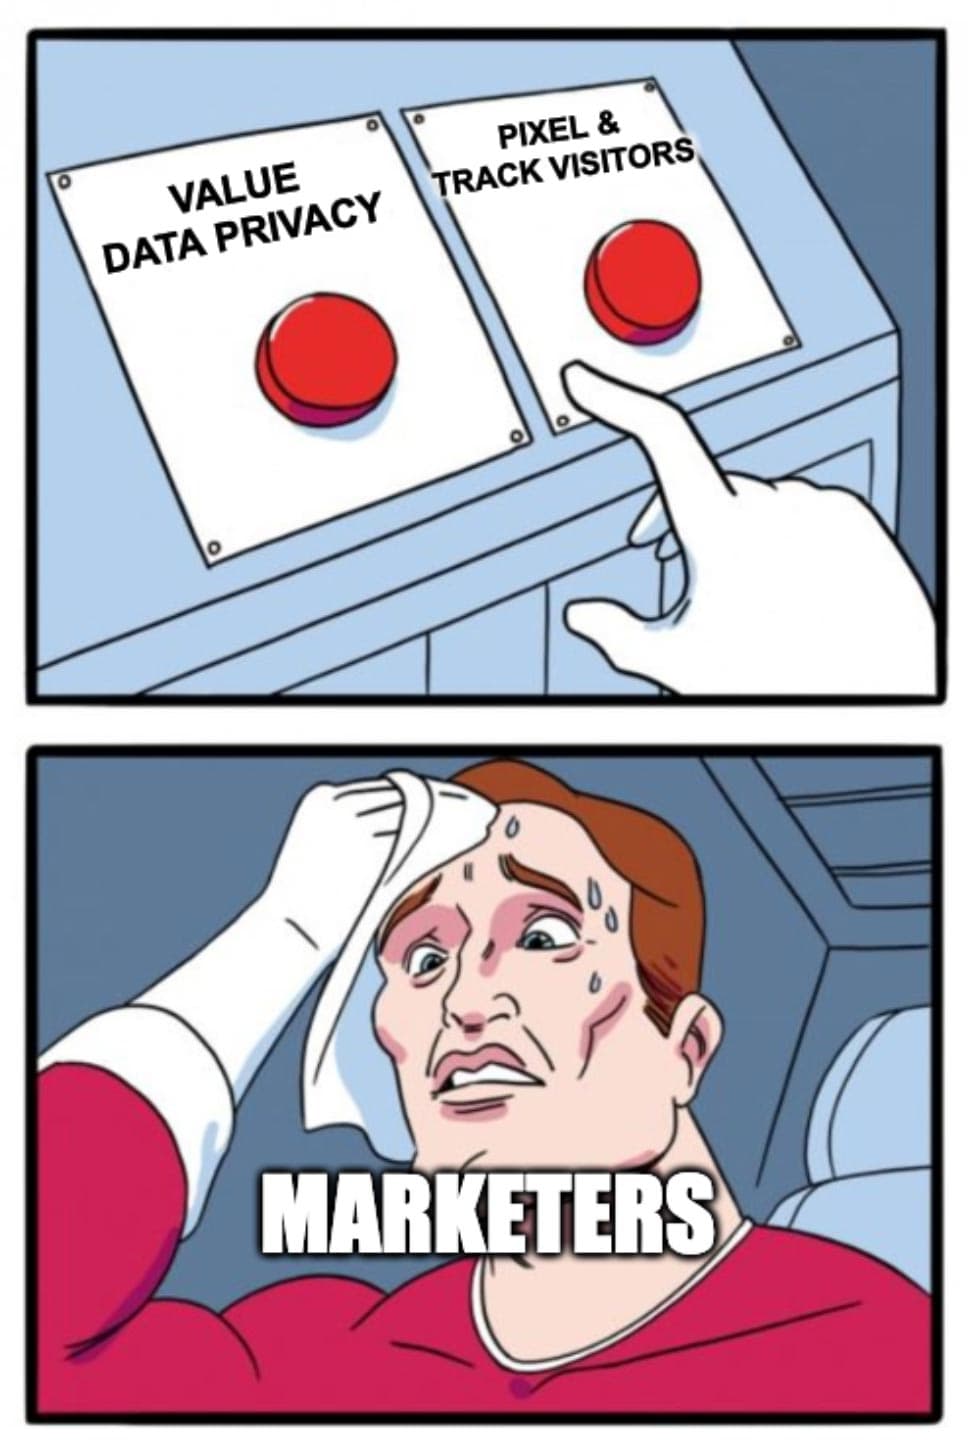 The ethical marketer's dilemma.